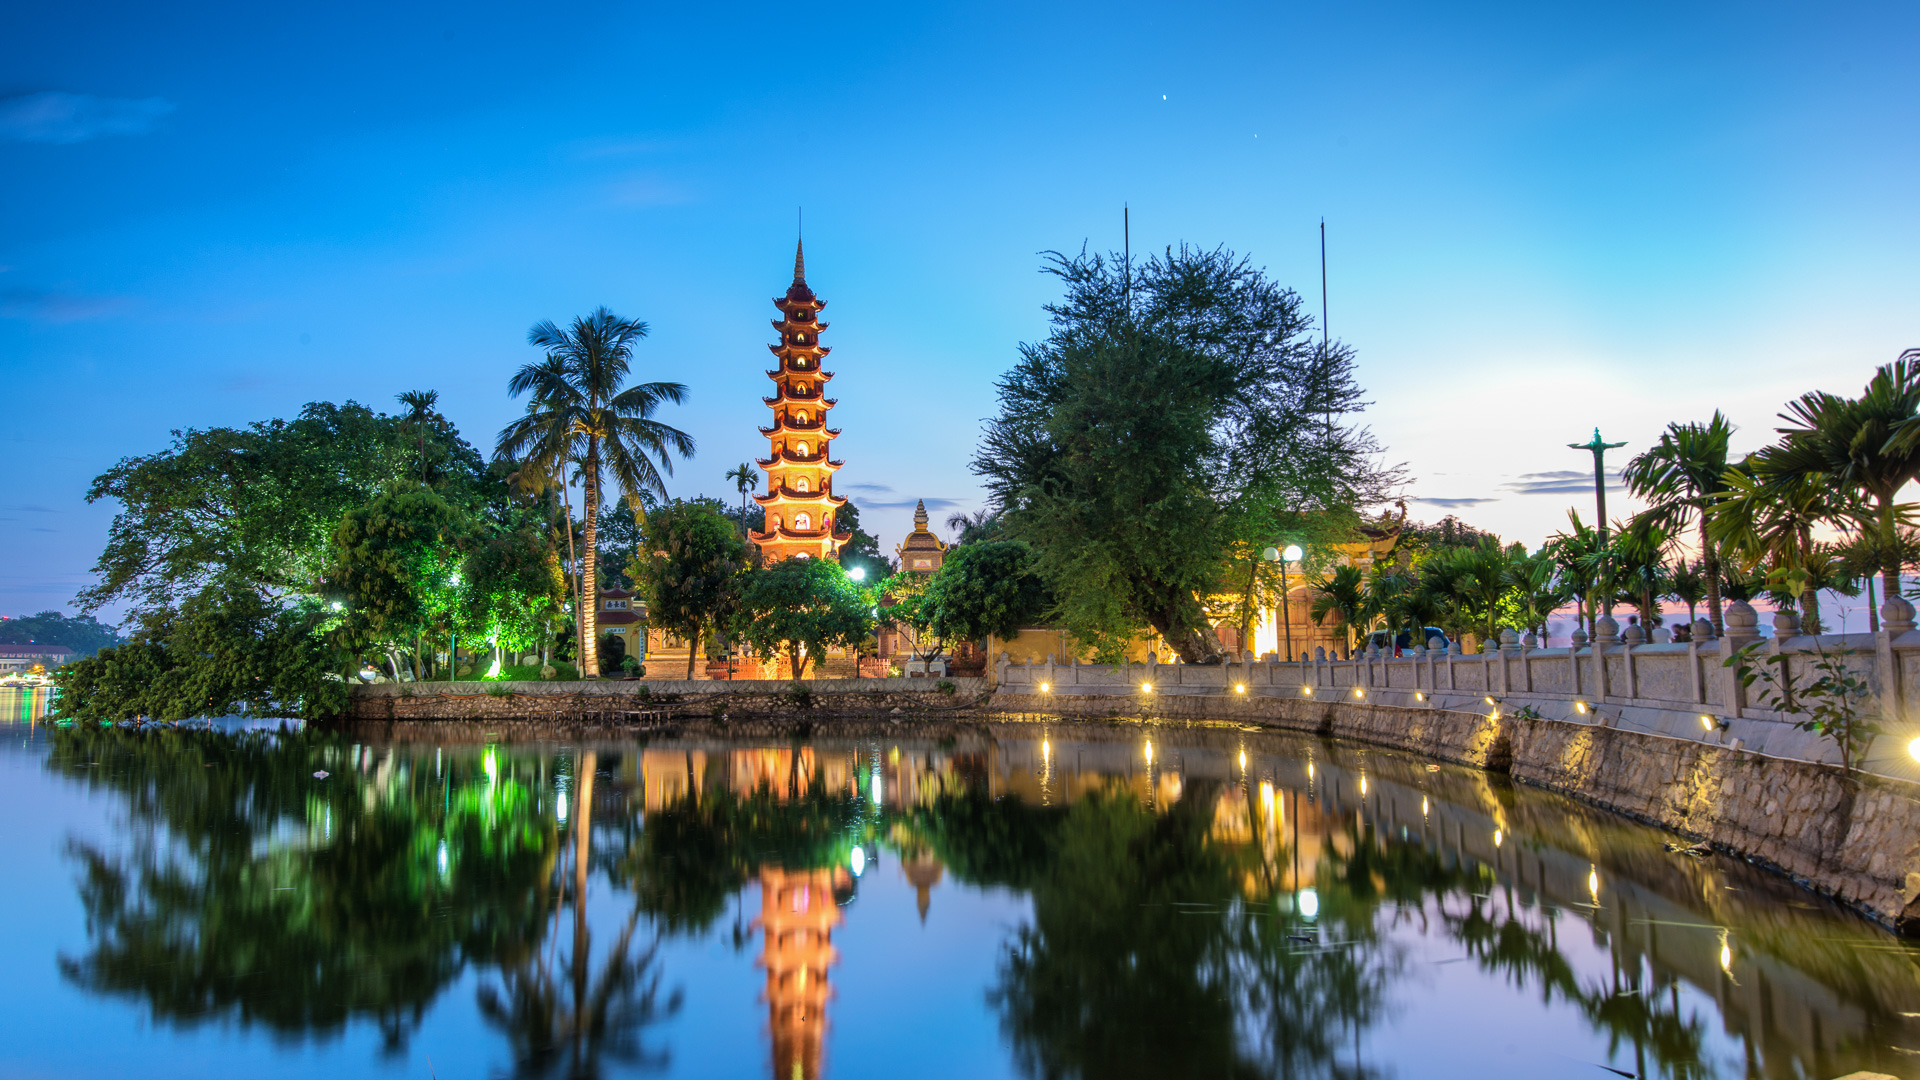 <ul> <li><strong>Daily Costs:</strong> About $77 less per person, per day</li> <li><strong>Airfare:</strong> About $870 less </li> </ul> <p>Like Singapore, Hanoi in Vietnam boasts an eclectic mix of ancient temples, modern buildings and exquisitely cheap street food, and all at substantial savings -- but airfare is what really settles this contest.</p> <p>Singapore's urban areas are a lot more modern and utopian-looking than Hanoi's, but Vietnam's capital is no slouch -- there are more museums than you can count. Temples like Bach Ma and the Temple of Literature satisfy your needs for pagoda photo ops but don't leave without spending barely anything on street foods like fried dumplings, snail soup and Vietnamese coffee.</p>